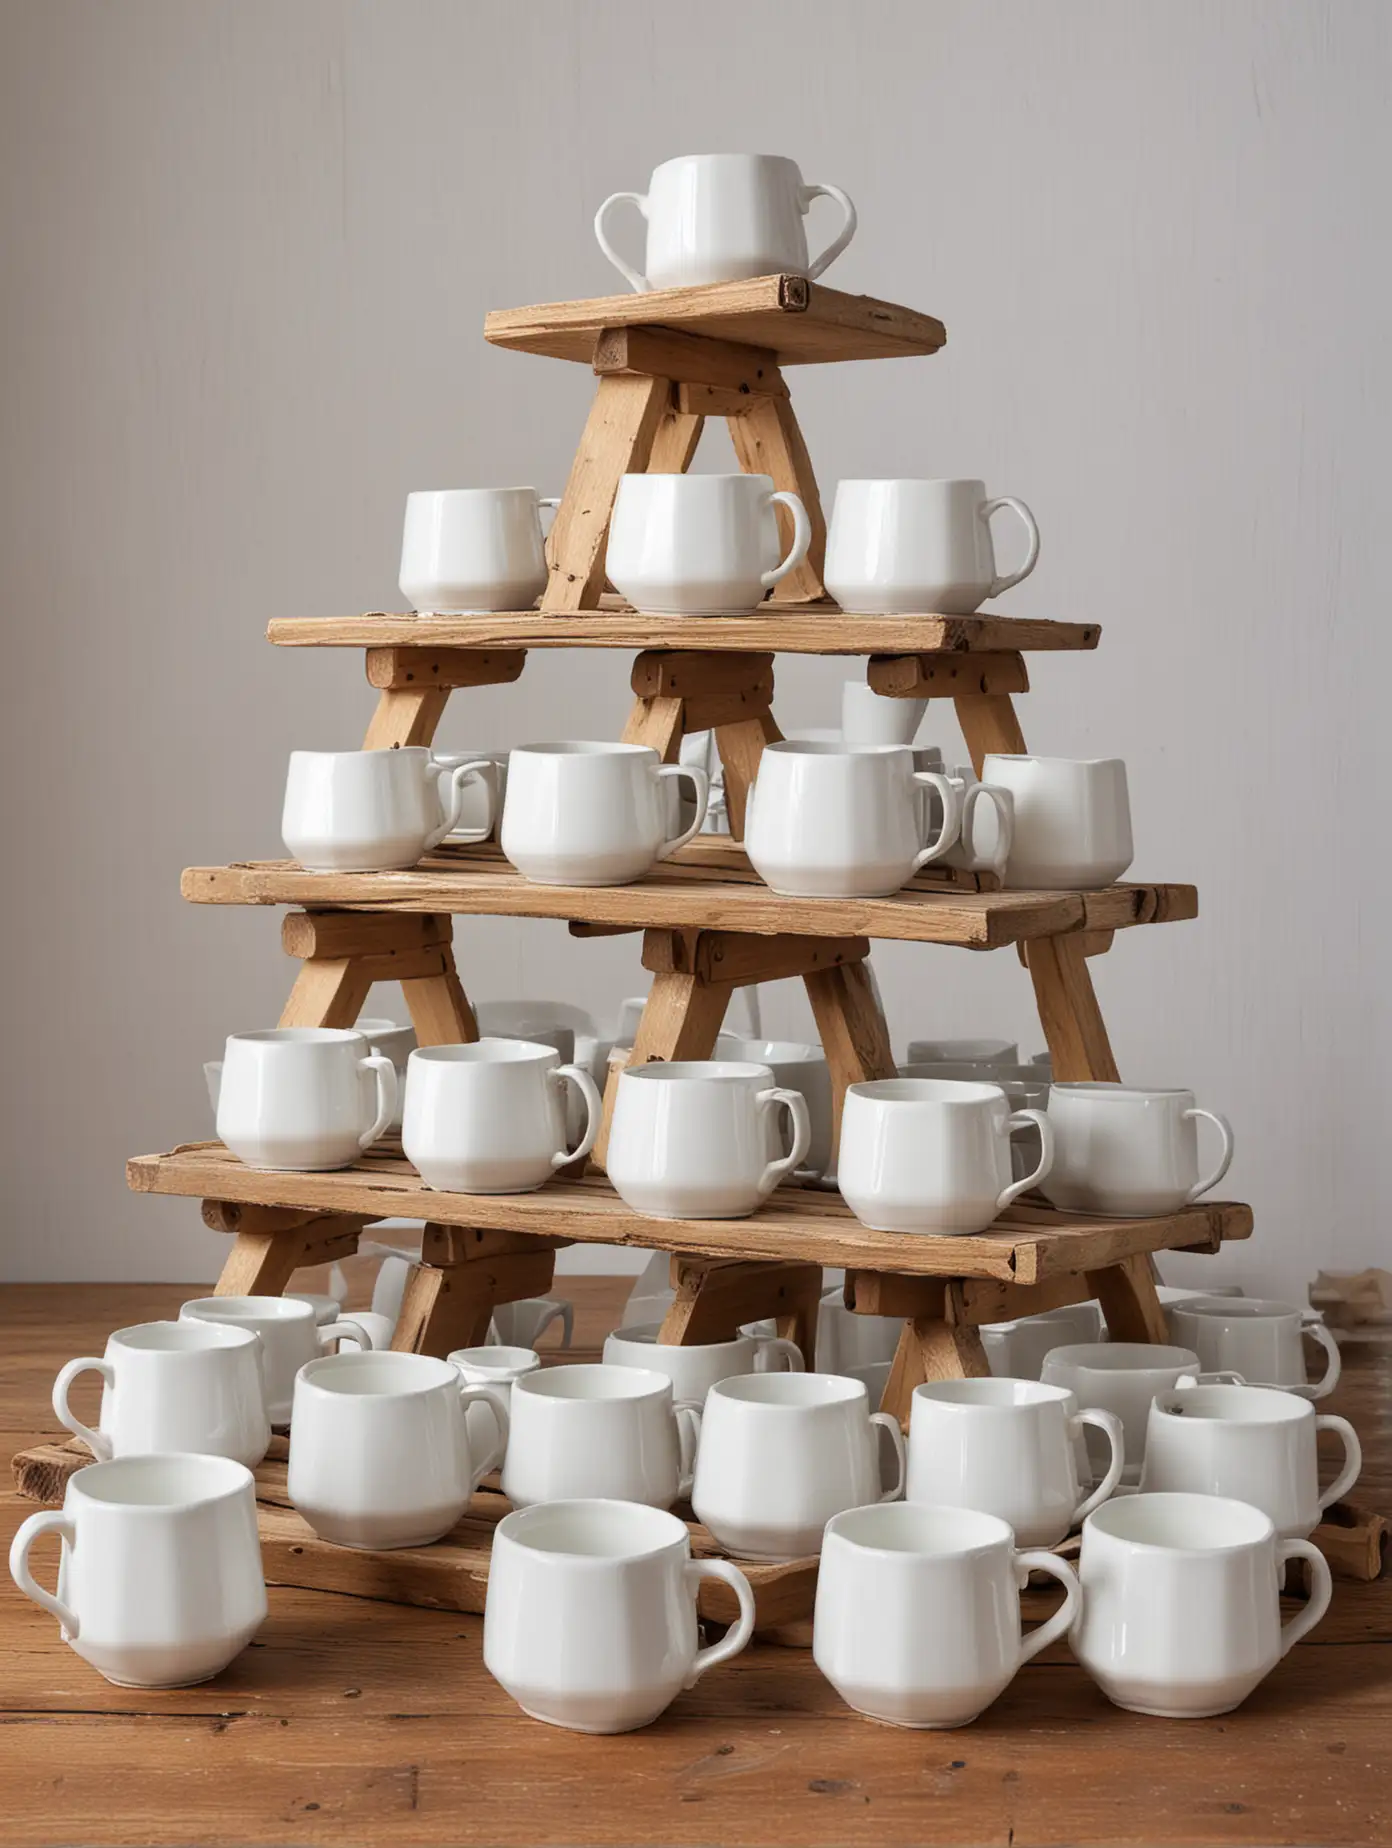 A pyramid of 20 white mugson an old table